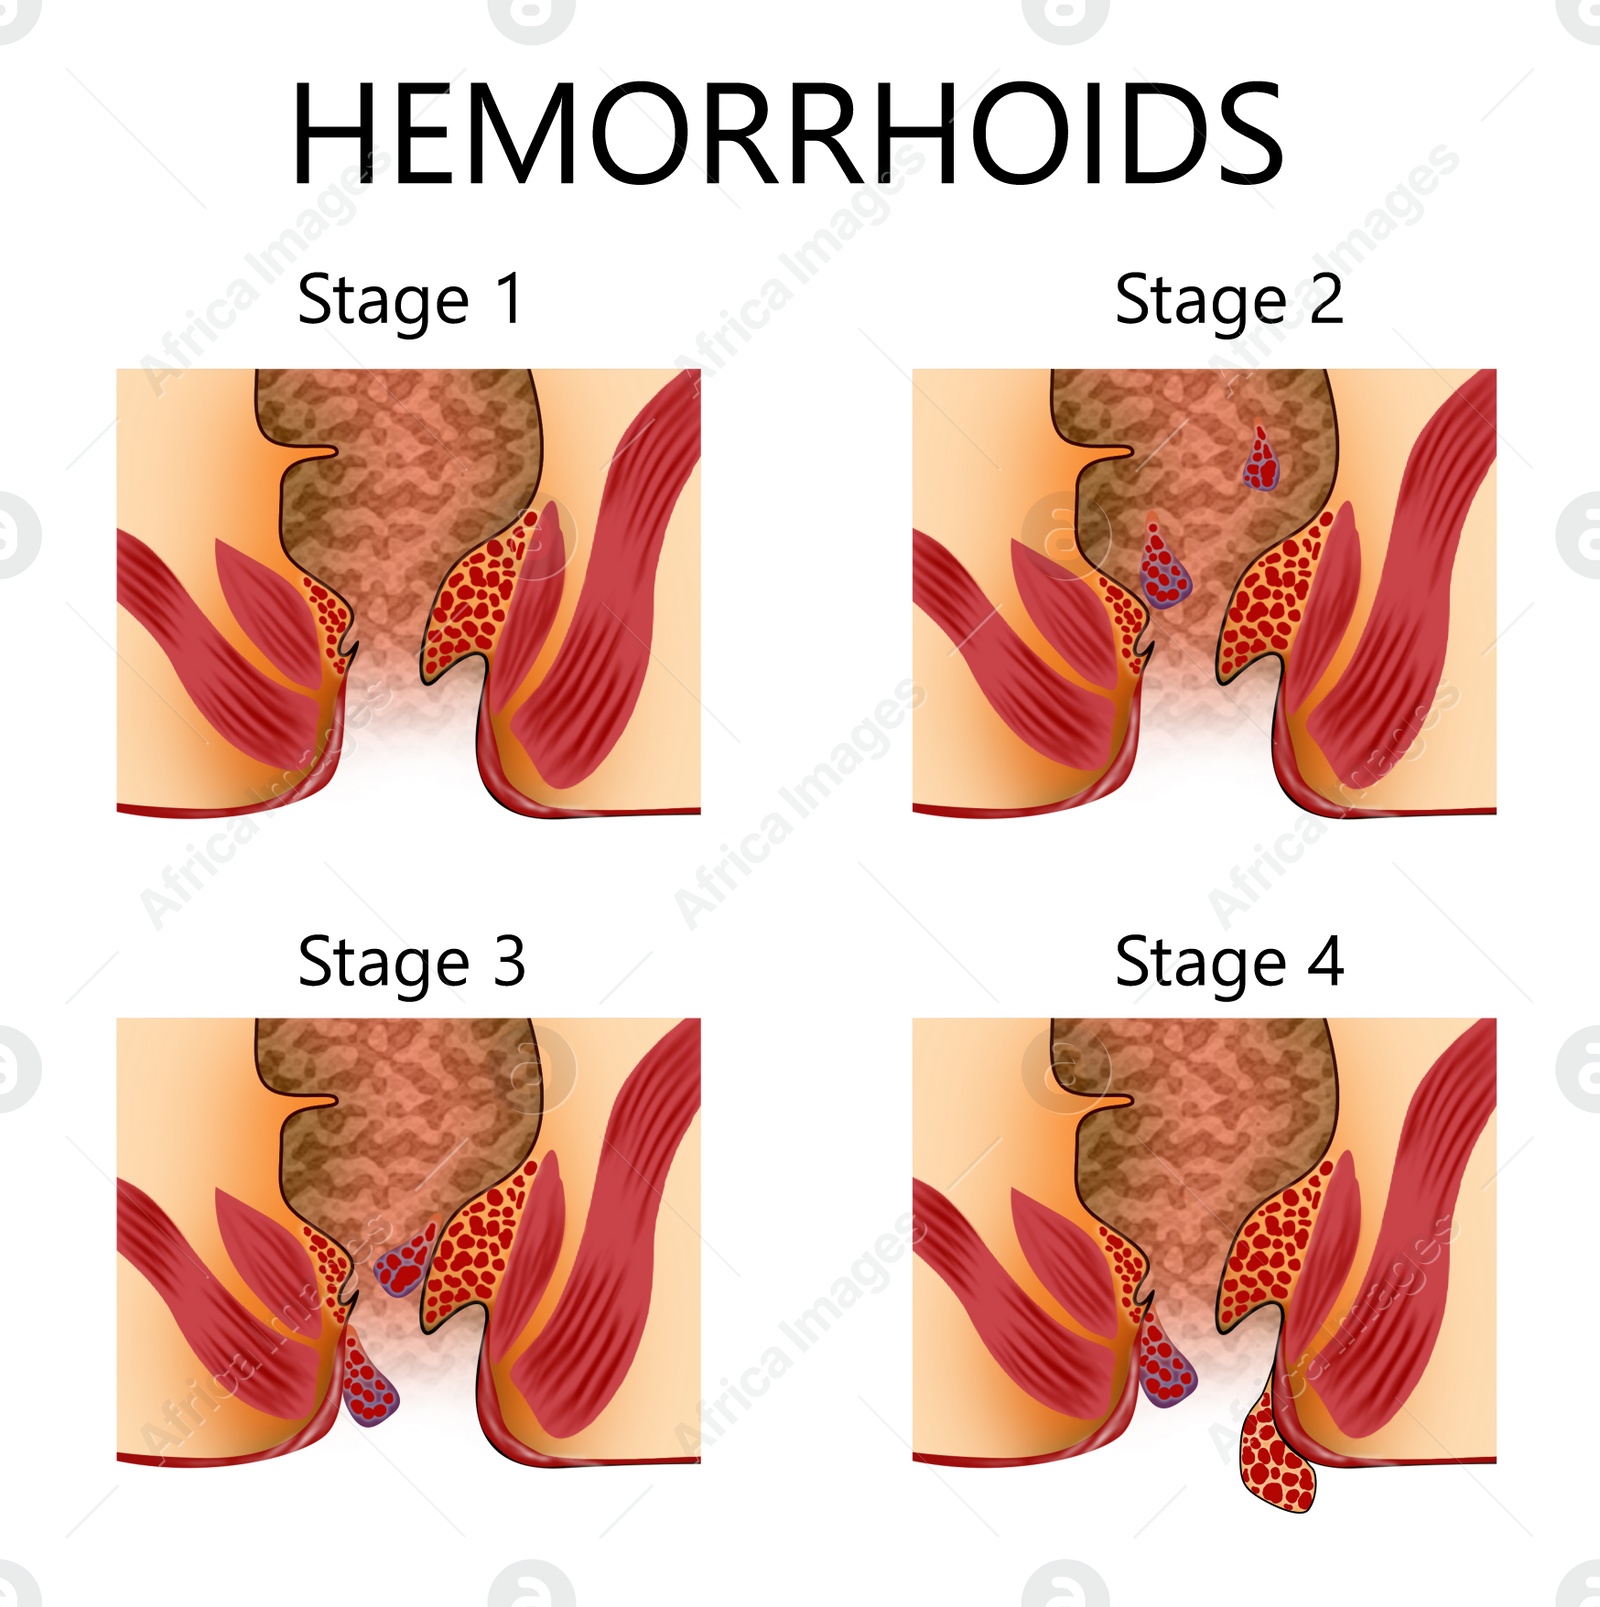 Image of Hemorrhoid stages. Unhealthy lower rectum with inflamed vascular structures, illustration